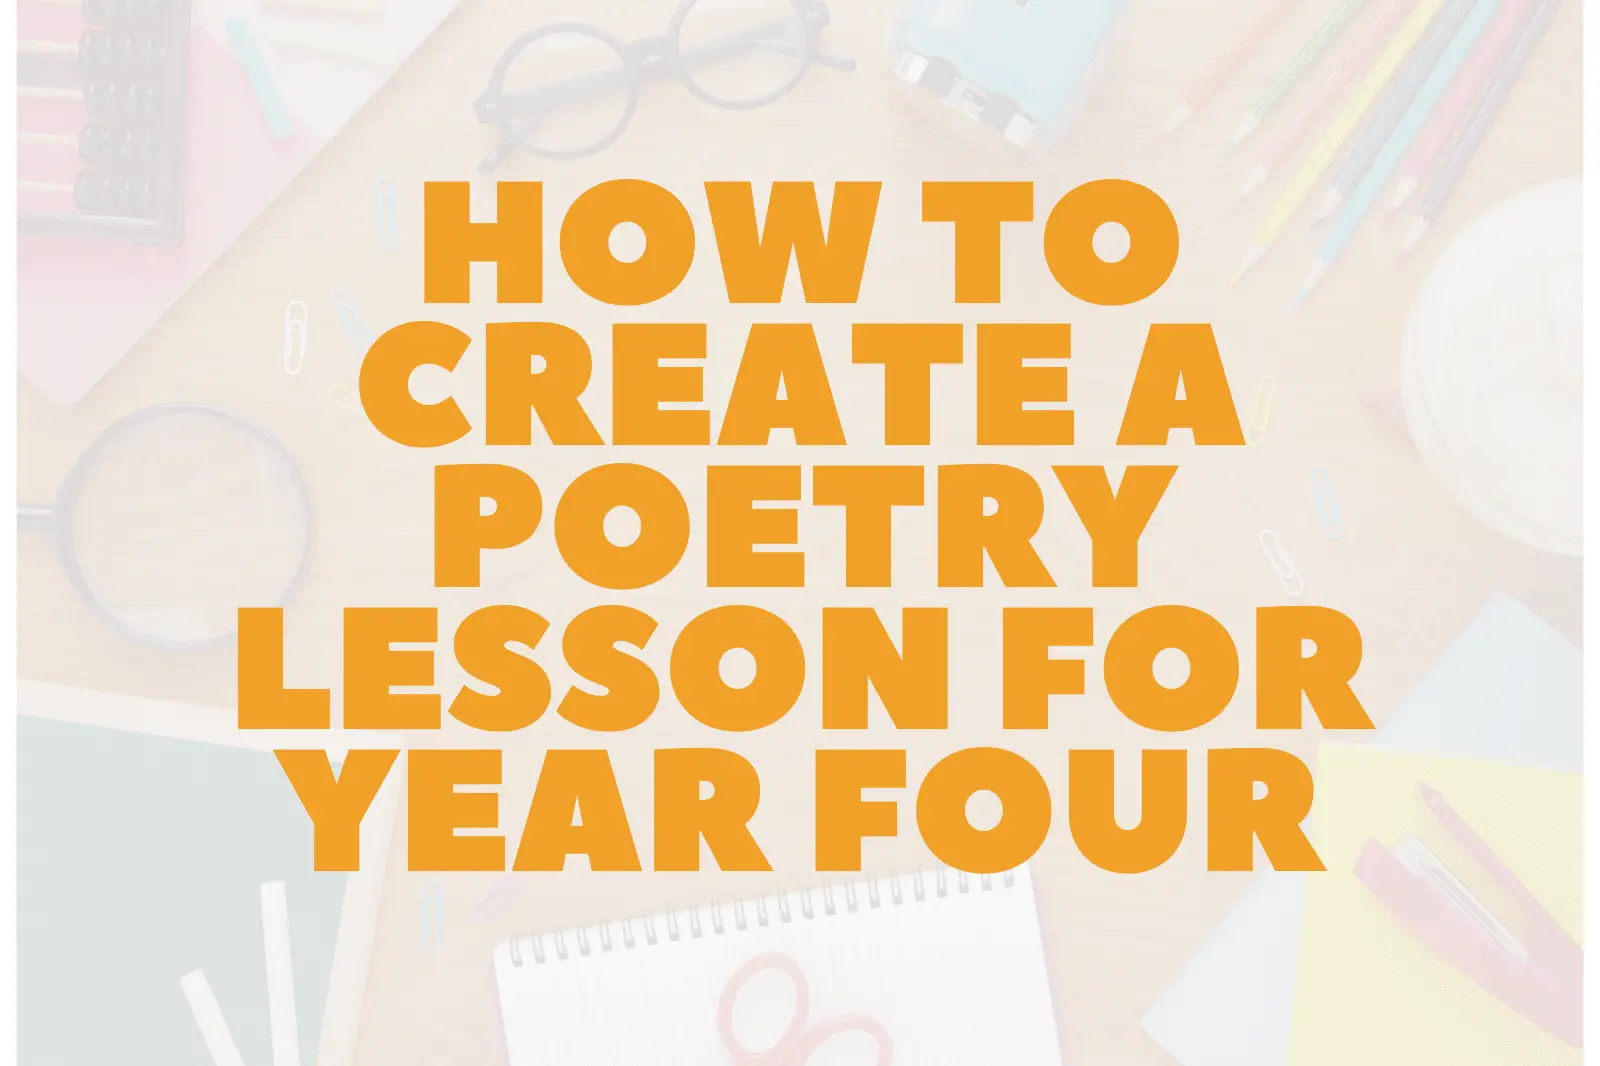 How to Create a Poetry Lesson for Year Four